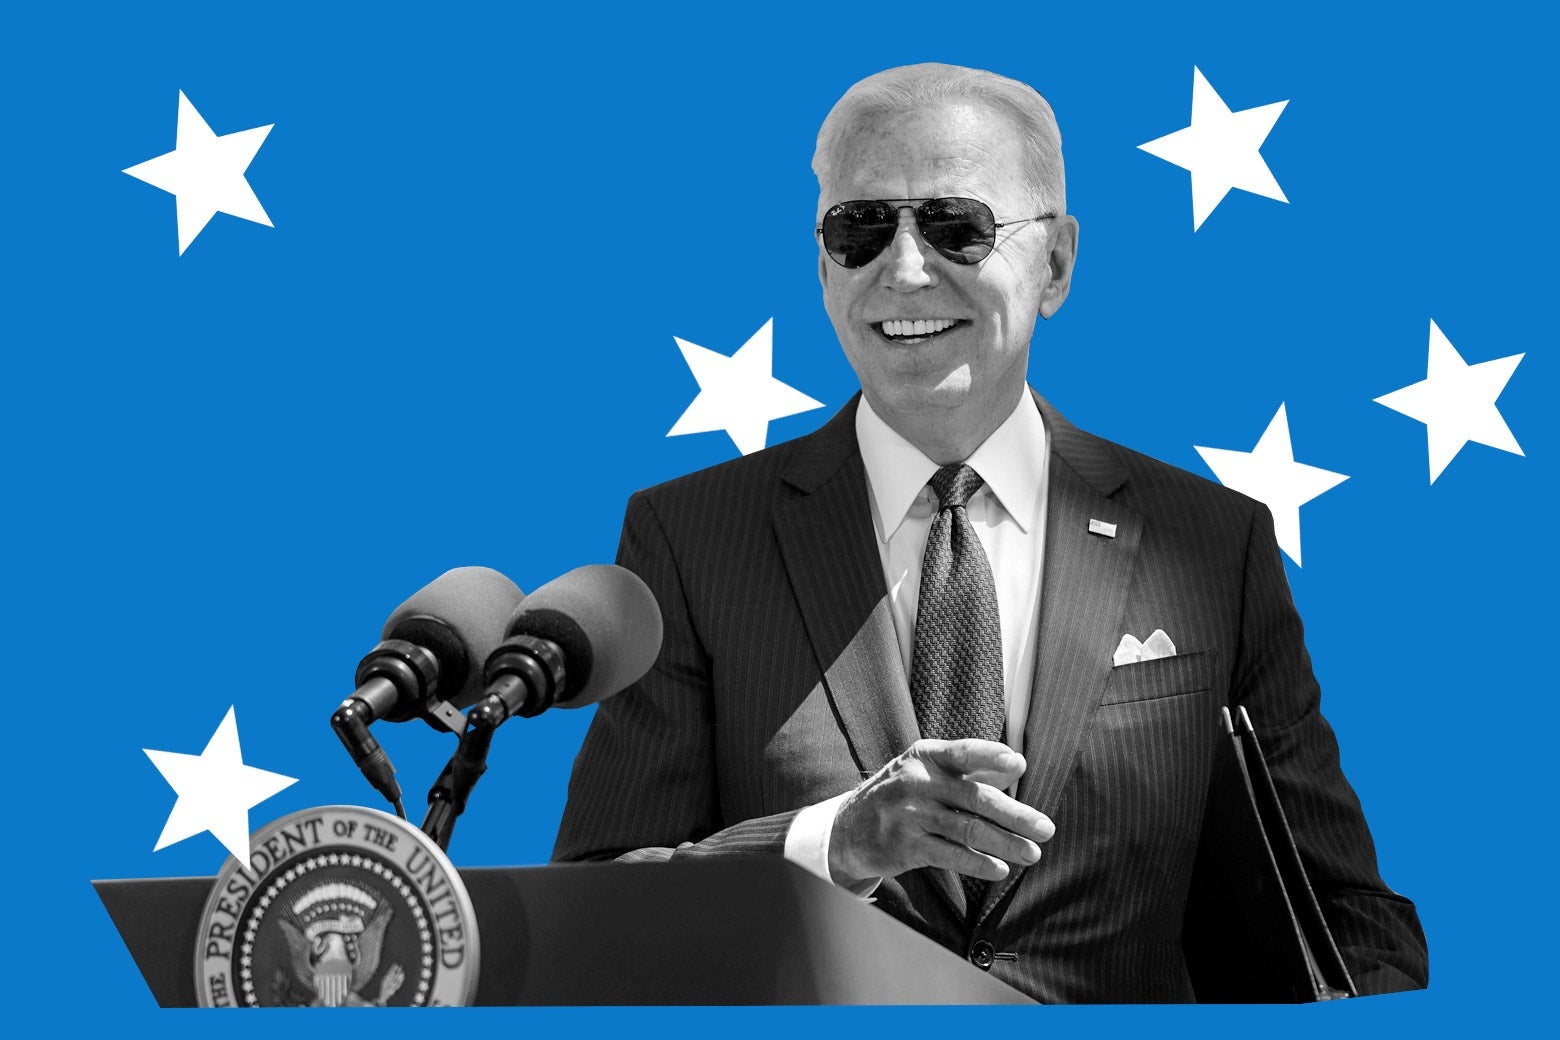 Biden wearing sunglasses and smiling over a background of stars
